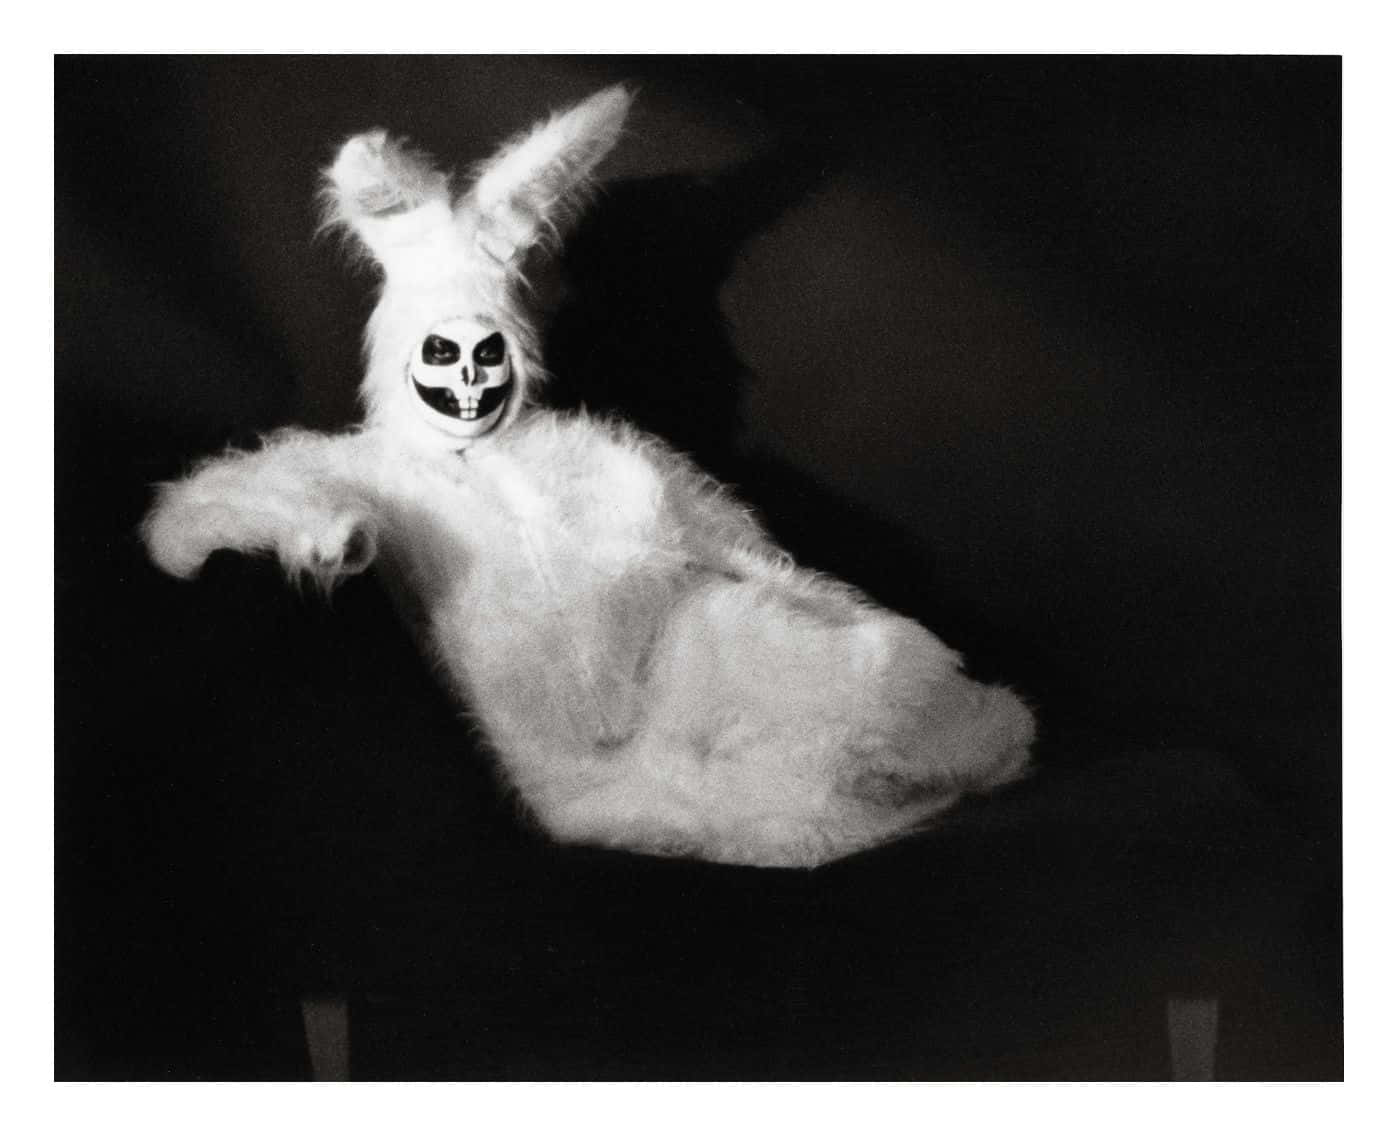 Free Creepy Easter Bunny Picture, Creepy Easter Bunny Picture for FREE